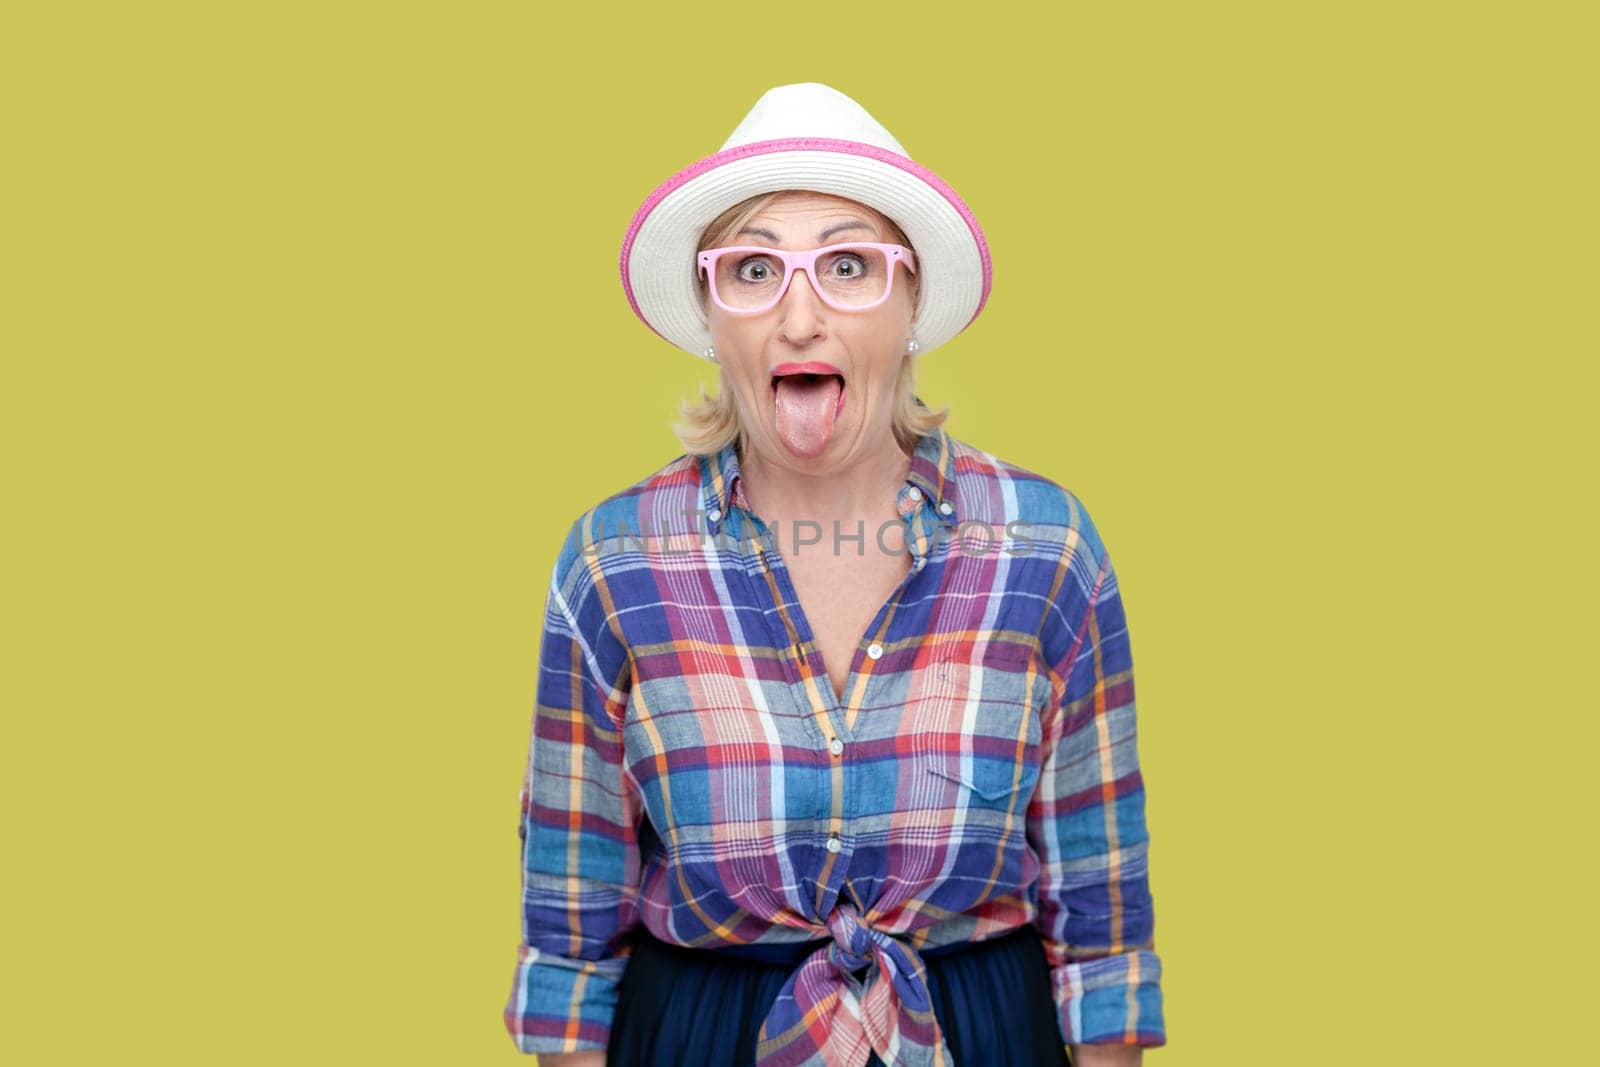 Portrait of childish mature woman wearing checkered shirt, hat and eyeglasses sticking out tongue, making funny grimace. Indoor studio shot isolated on yellow background.